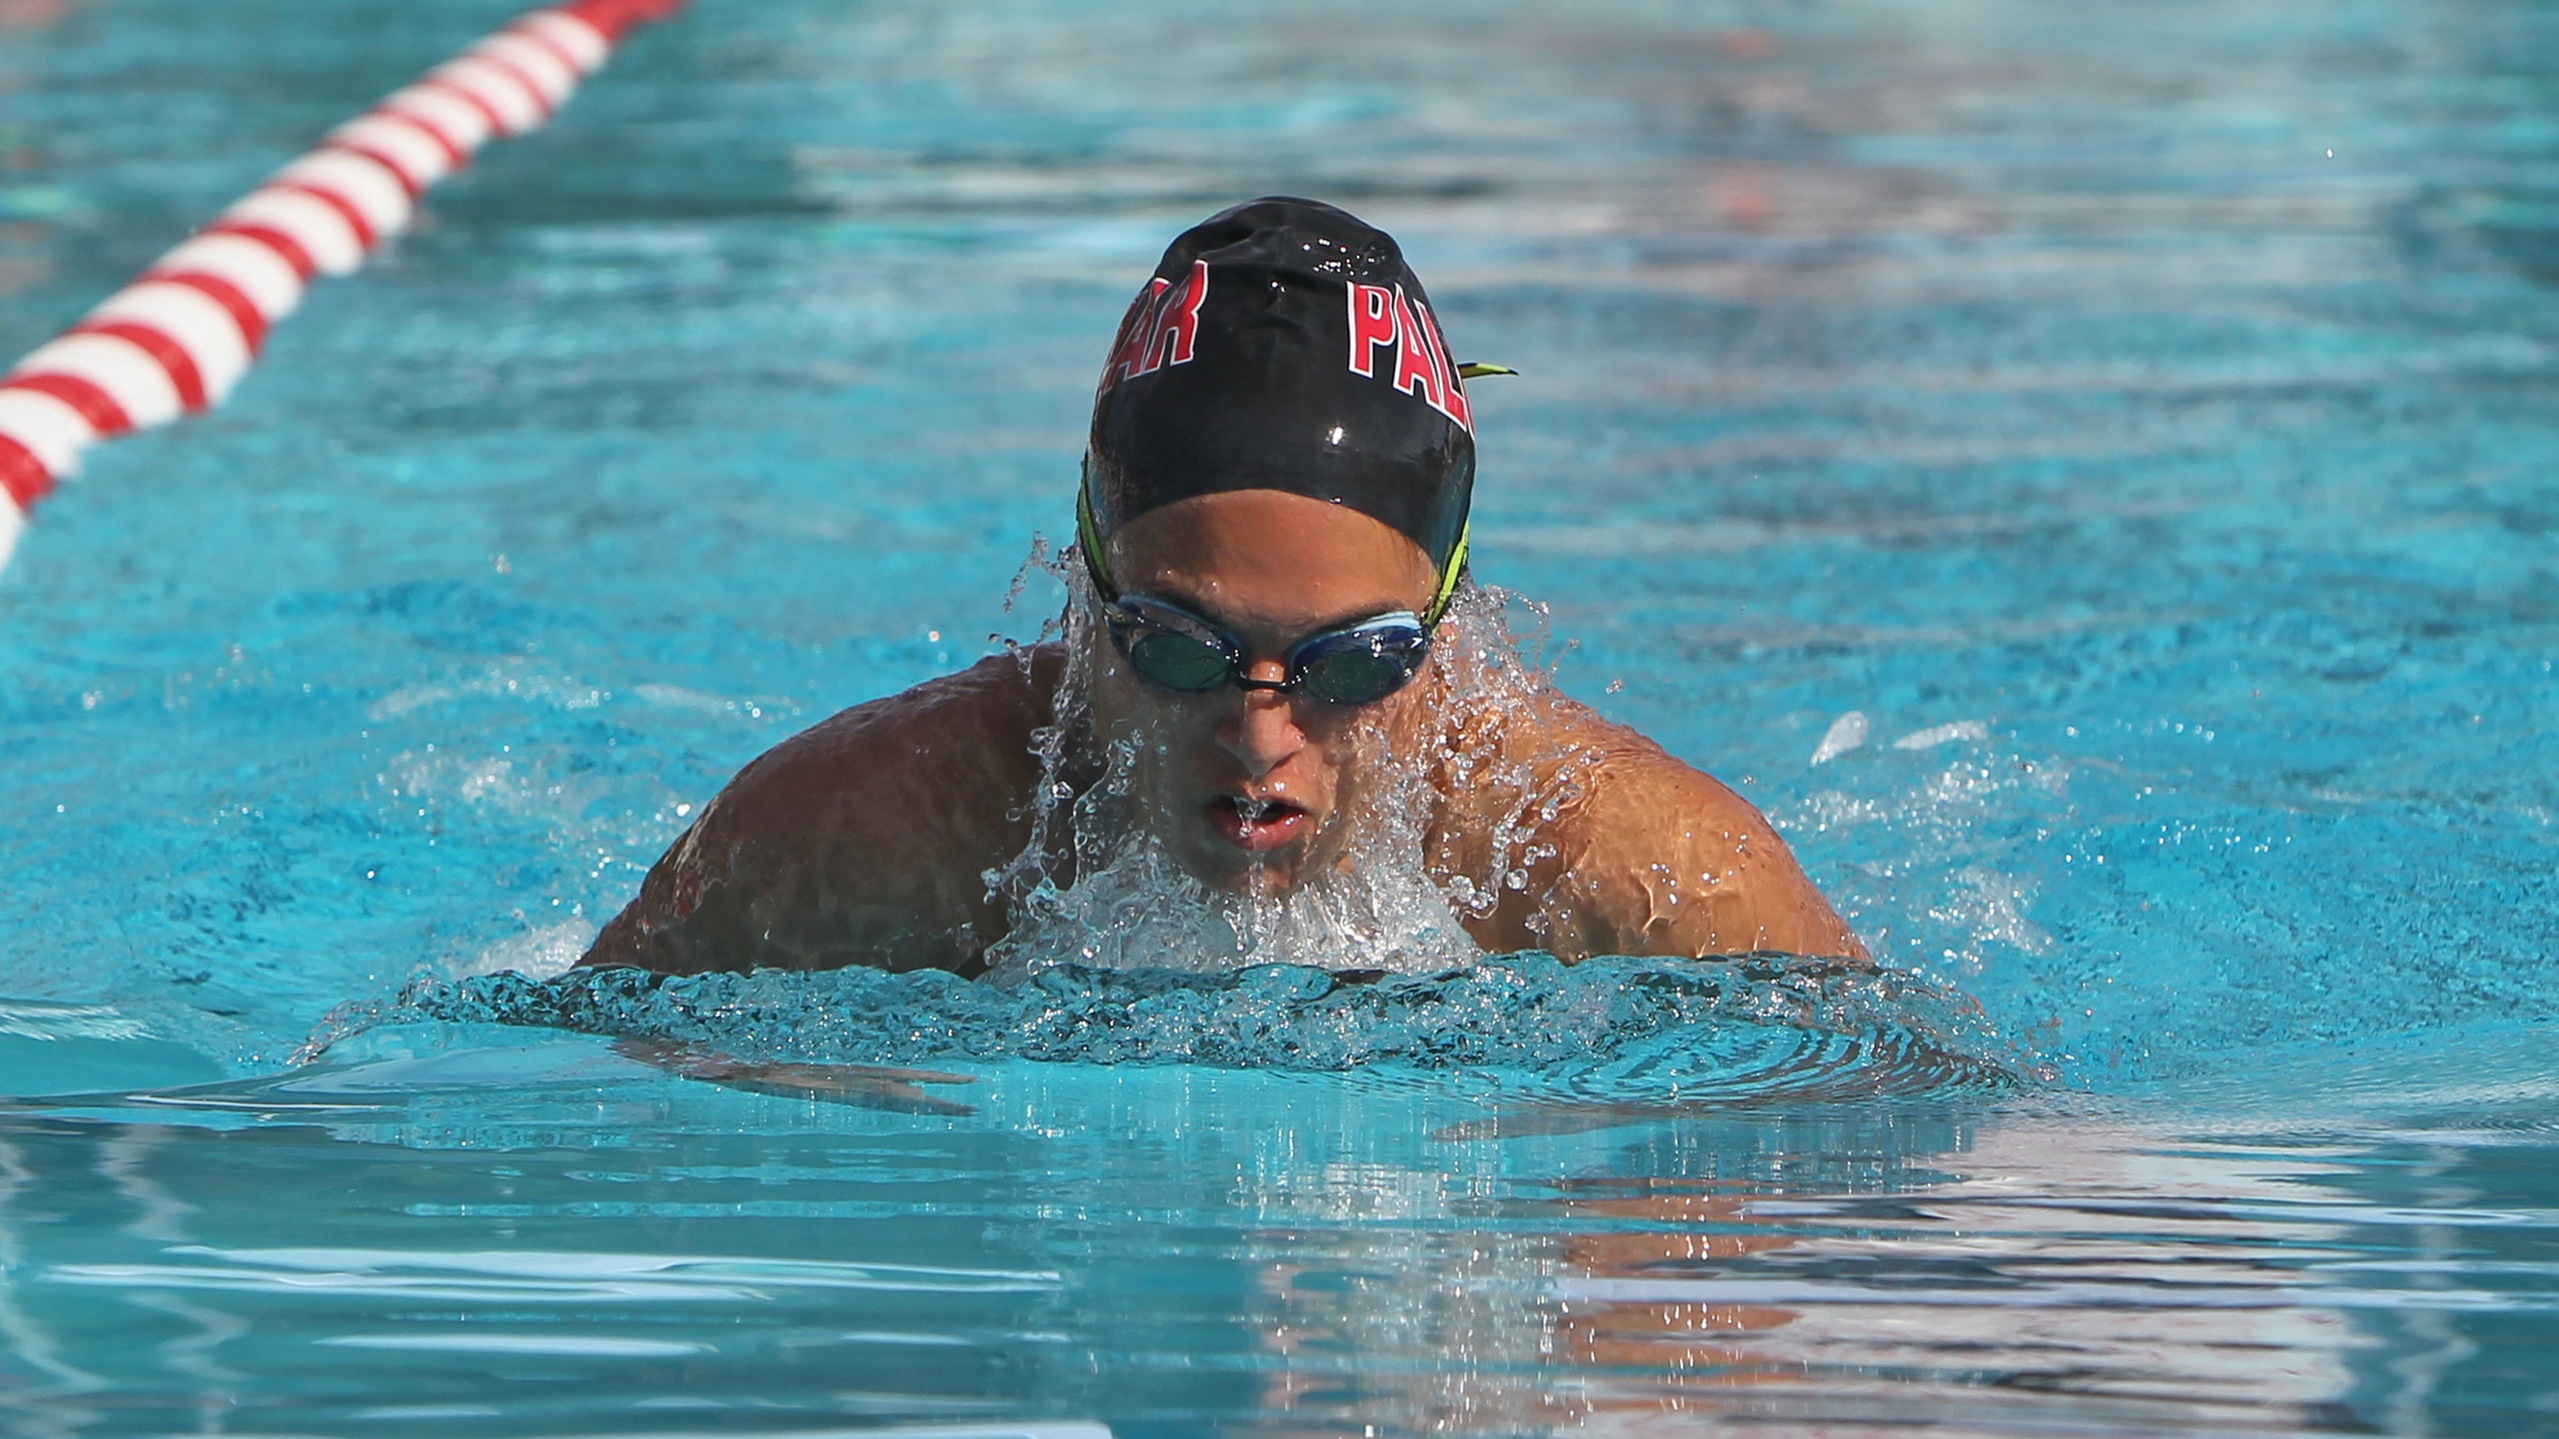 Elena Pena finished in 3rd in the 200Y Breast. Photo by Hugh Cox.